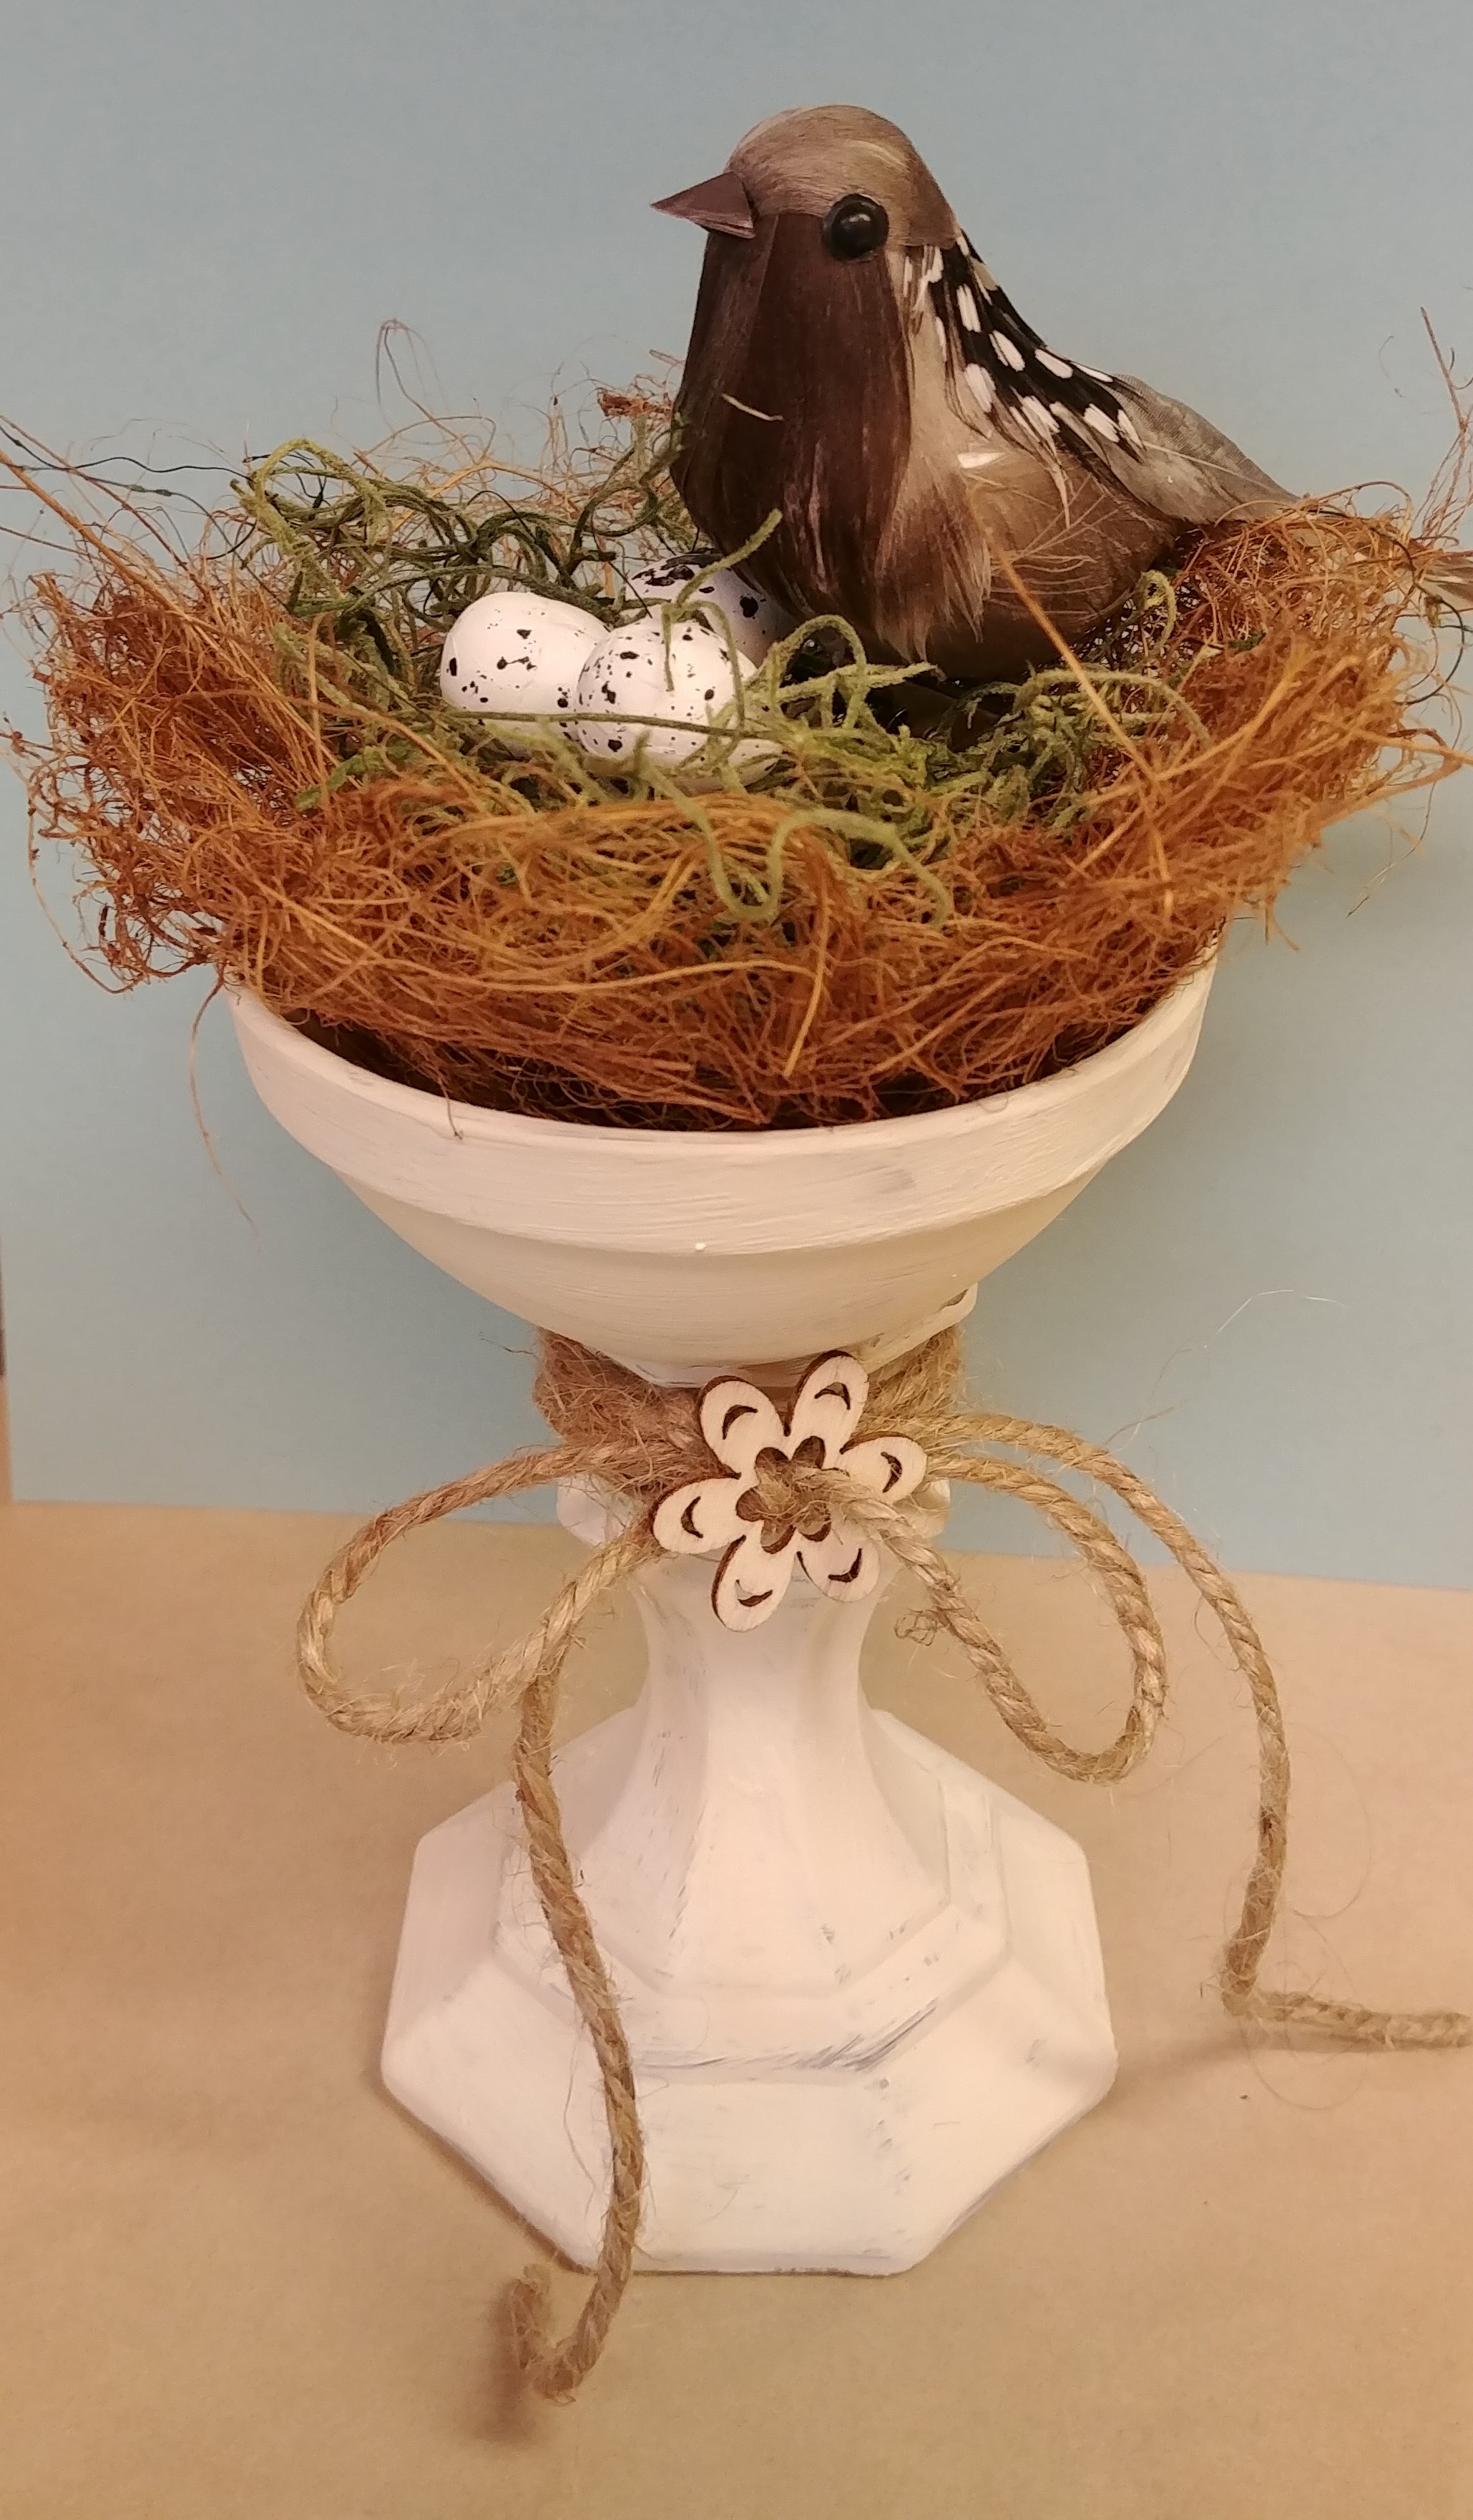 bird on nest with eggs nestled in a candlestick holder